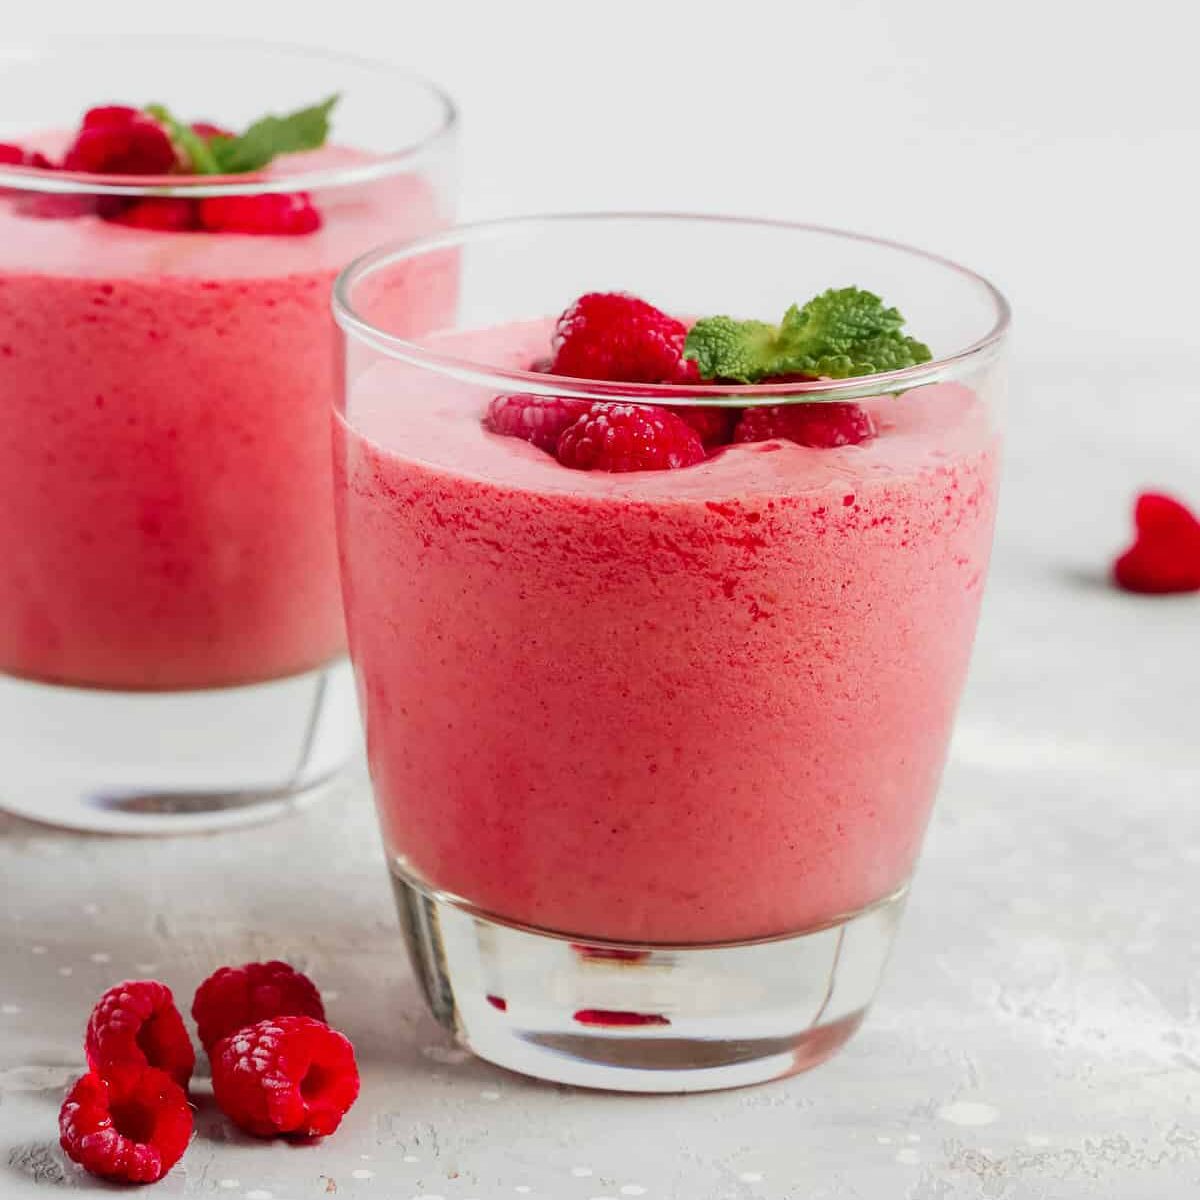 Raspberry smoothie in a glass garnished with fresh berries.